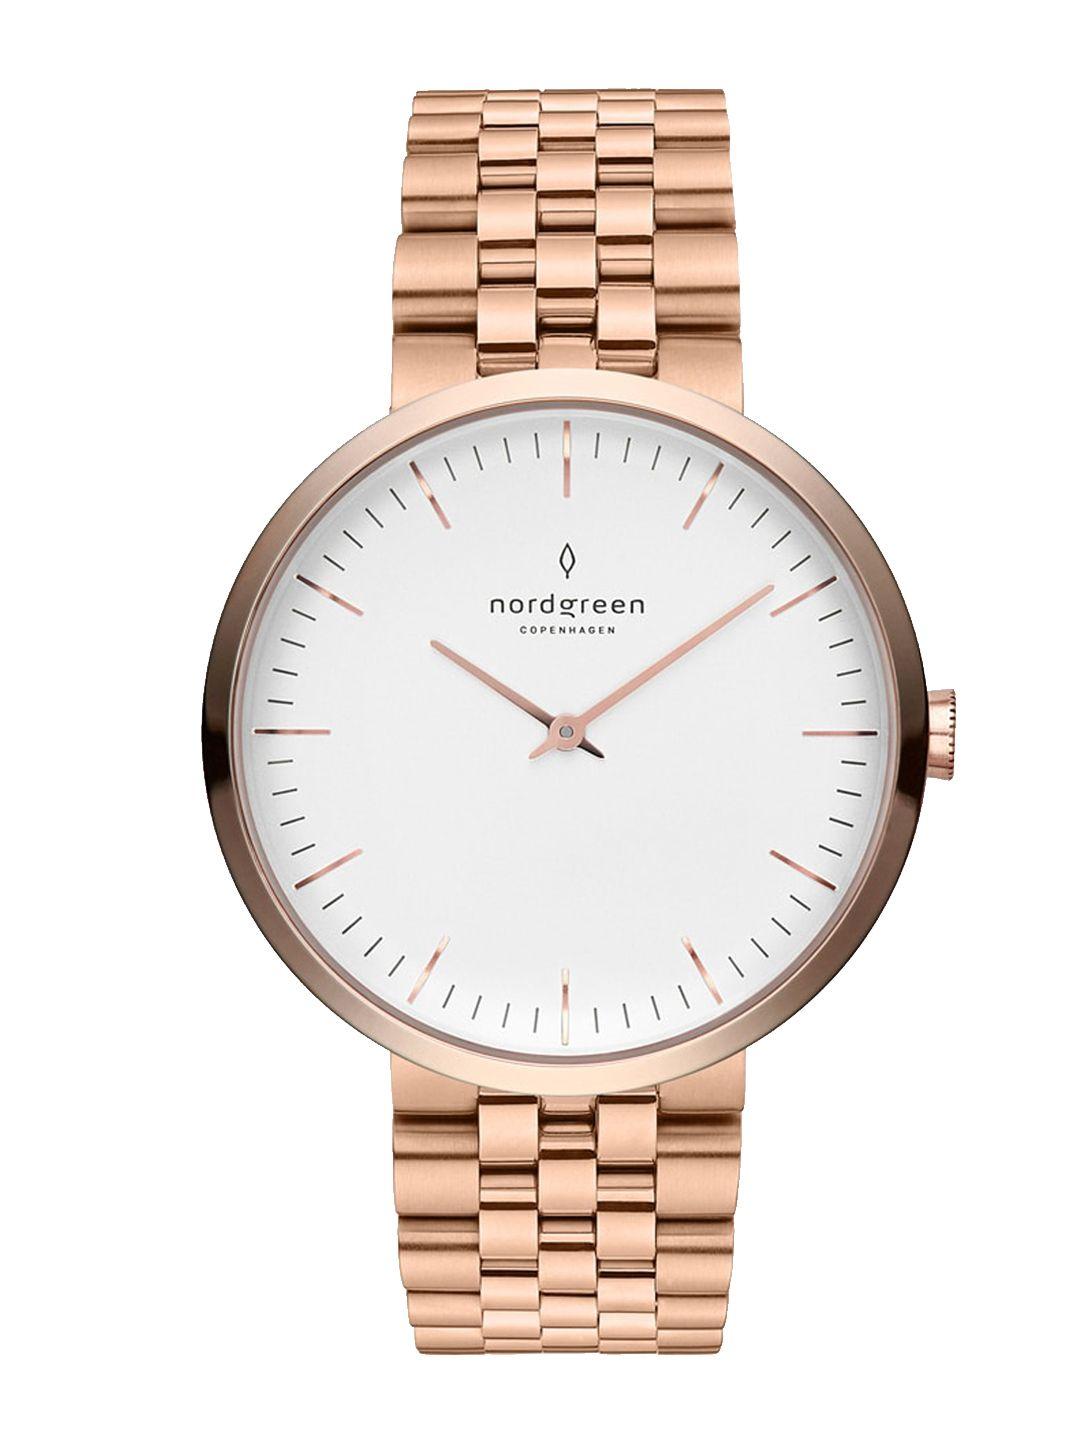 nordgreen-woman-white-dial-&-rose-gold-toned-bracelet-style-watch-in32rg5lroxx